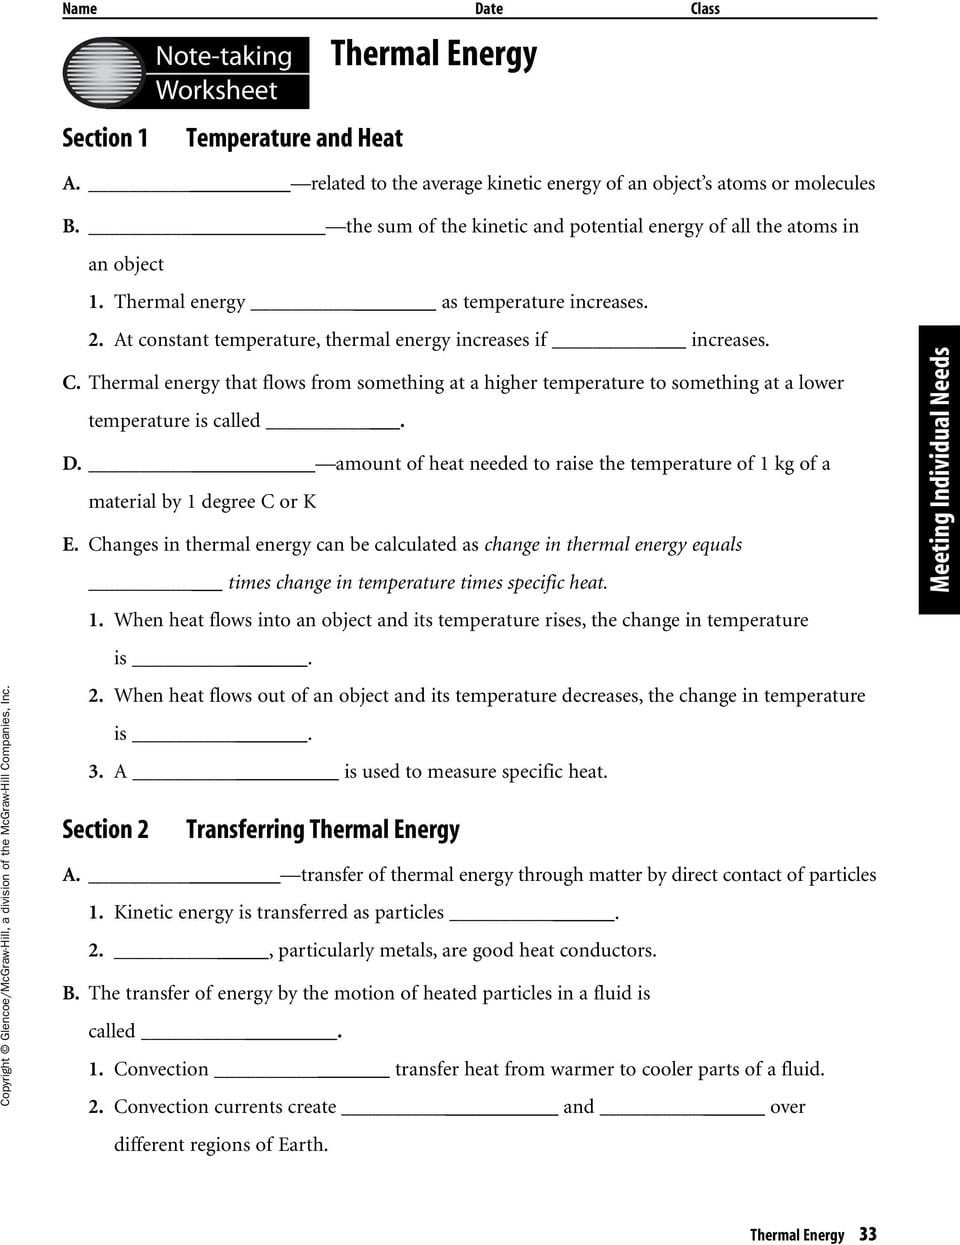 Thermal Energy Chapter Resources Includes Glencoe Science Intended For Energy Note Taking Worksheet Answers